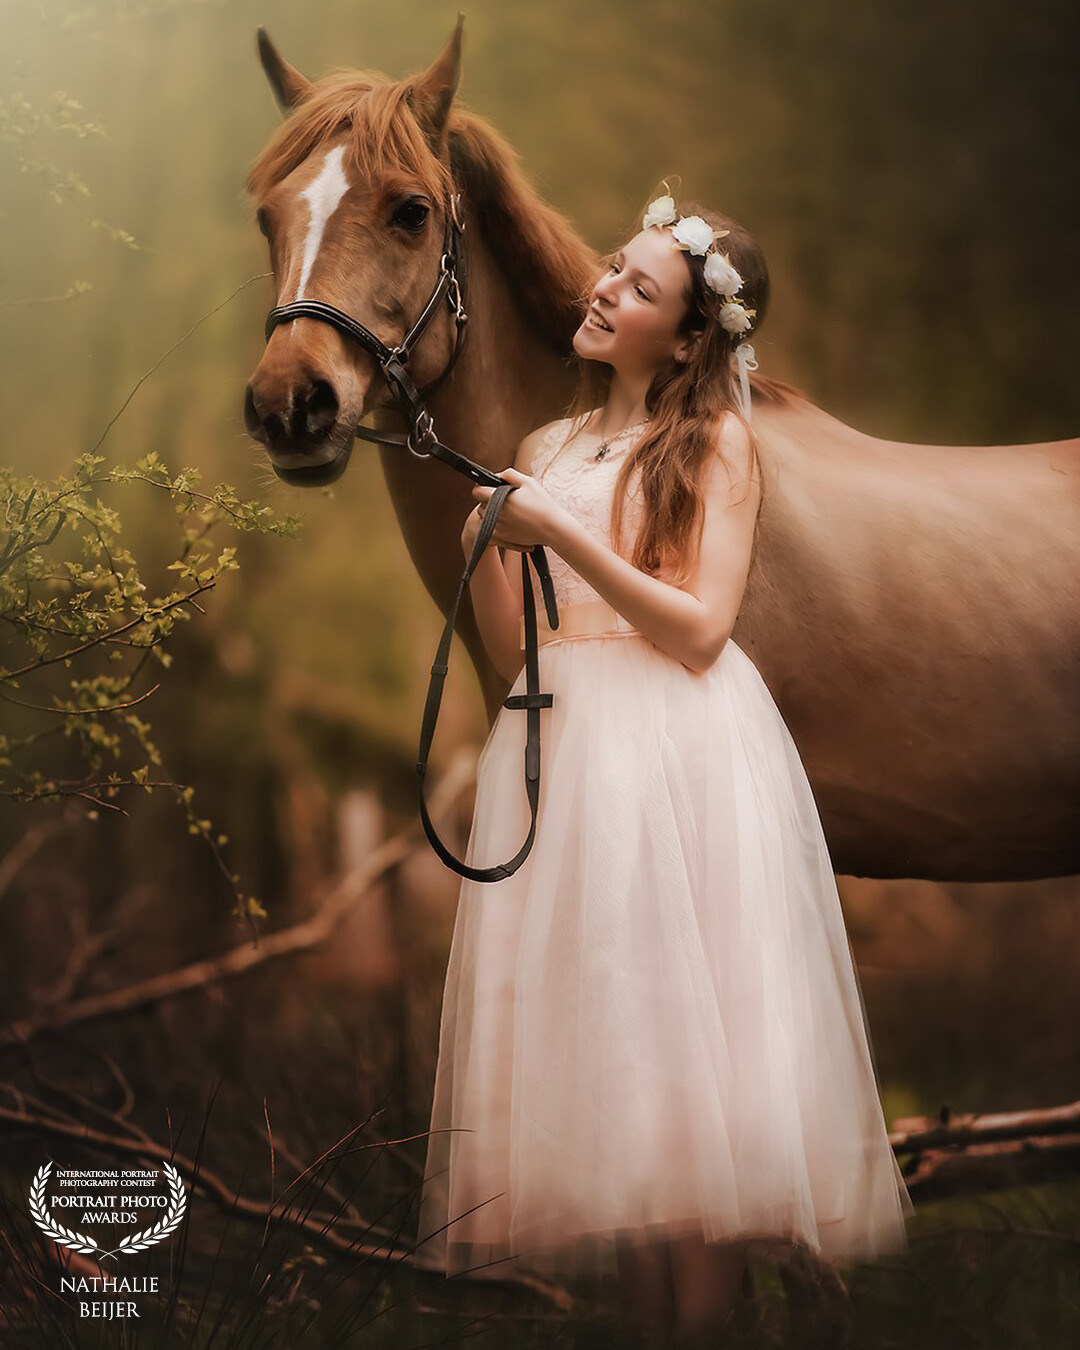 Girls & Horses a beautiful dress and an hour of photoshop are the best ingredients for a fantastic dreamy picture to hang on the wall. Model Caylin